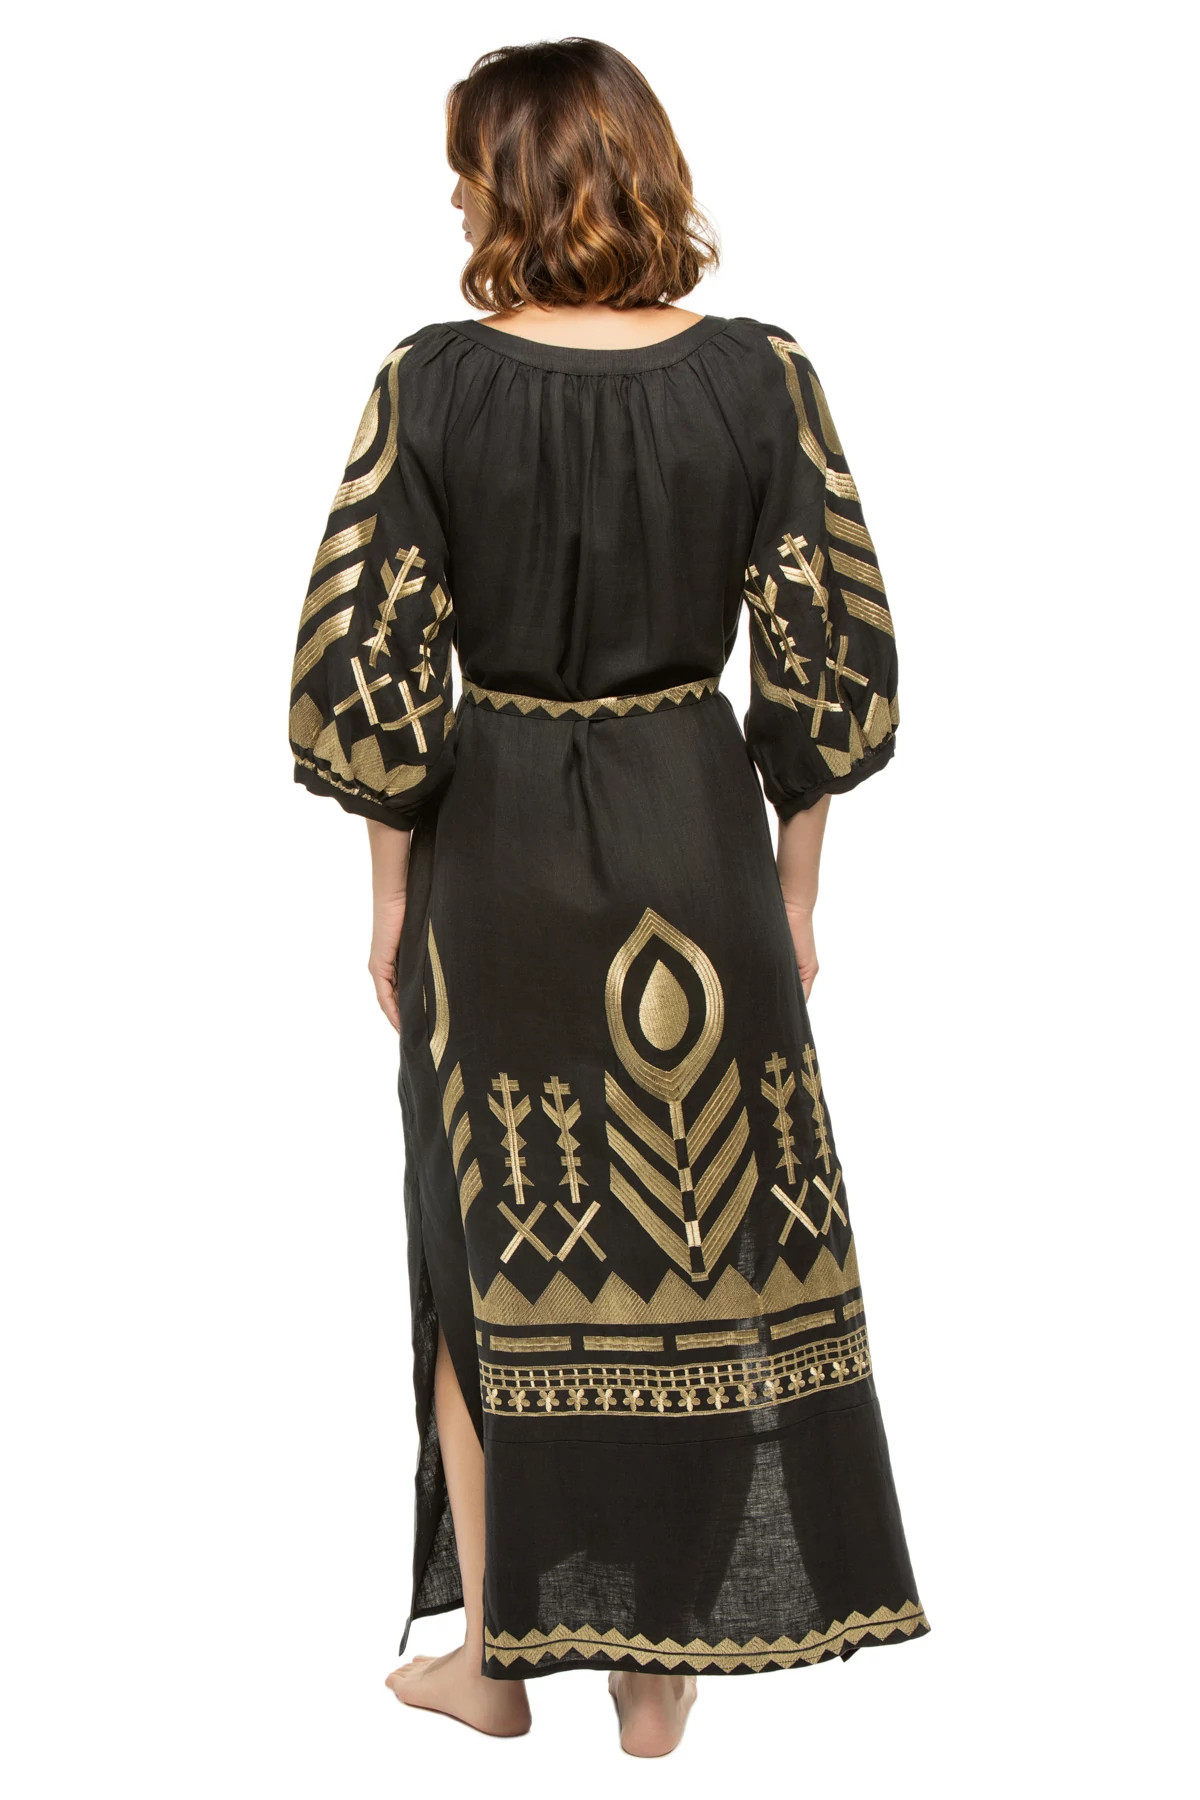 BLACK GOLD Metallic Embroidered Maxi Dress image number 2